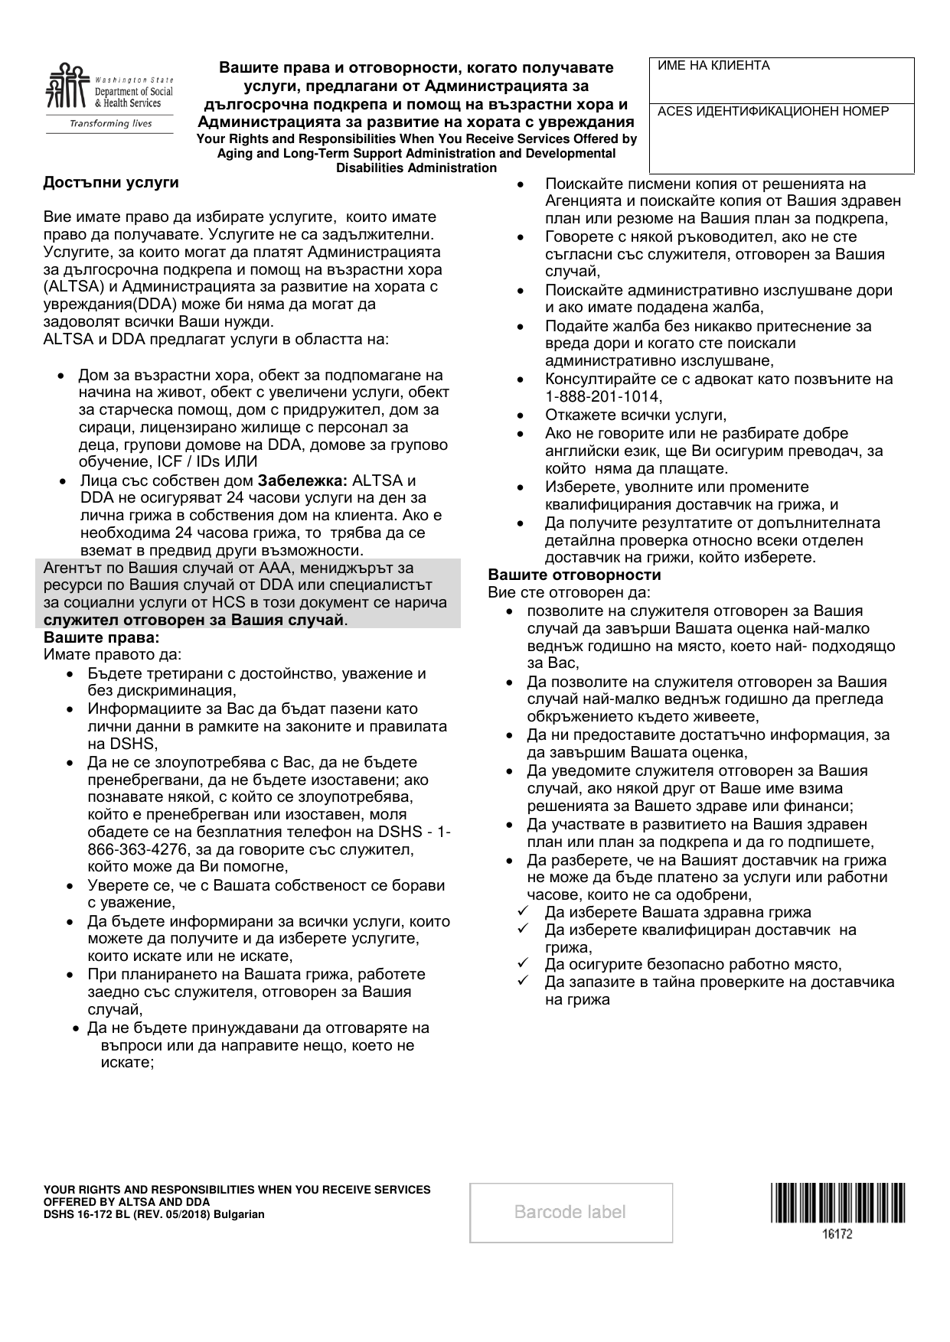 DSHS Form 16-172 Your Rights and Responsibilities When You Receive Services Offered by Aging and Long-Term Support Administration and Developmental Disabilities Administration - Washington (Bulgarian), Page 1